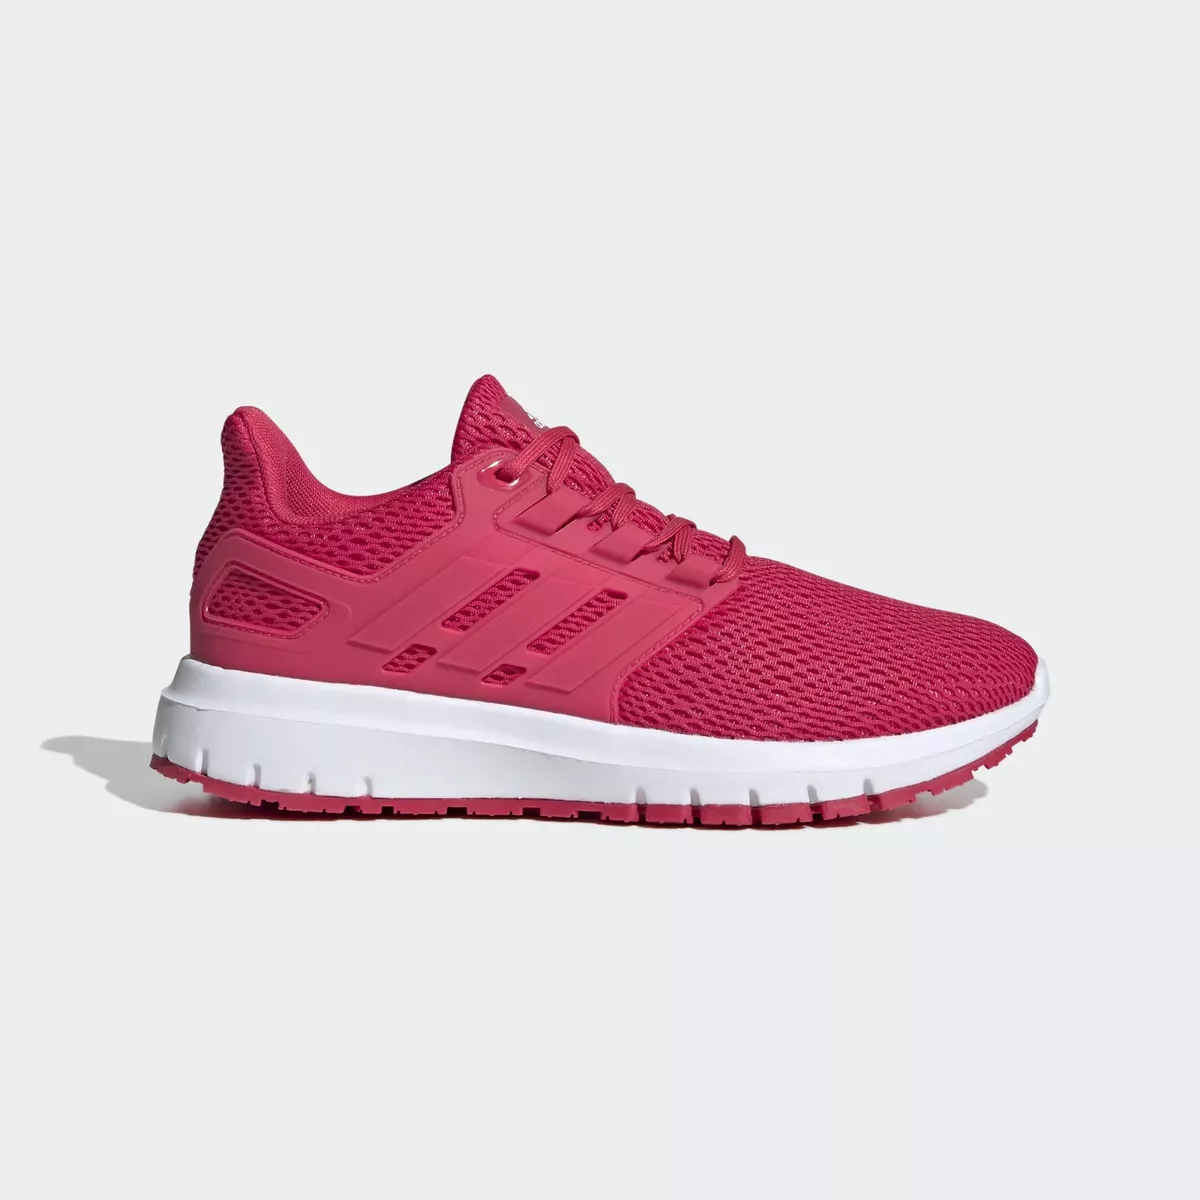 Tenis Para Mujer adidas Ultimashow Color Power Pink/power Pink/cloud White - Adulto 4.5 Mx